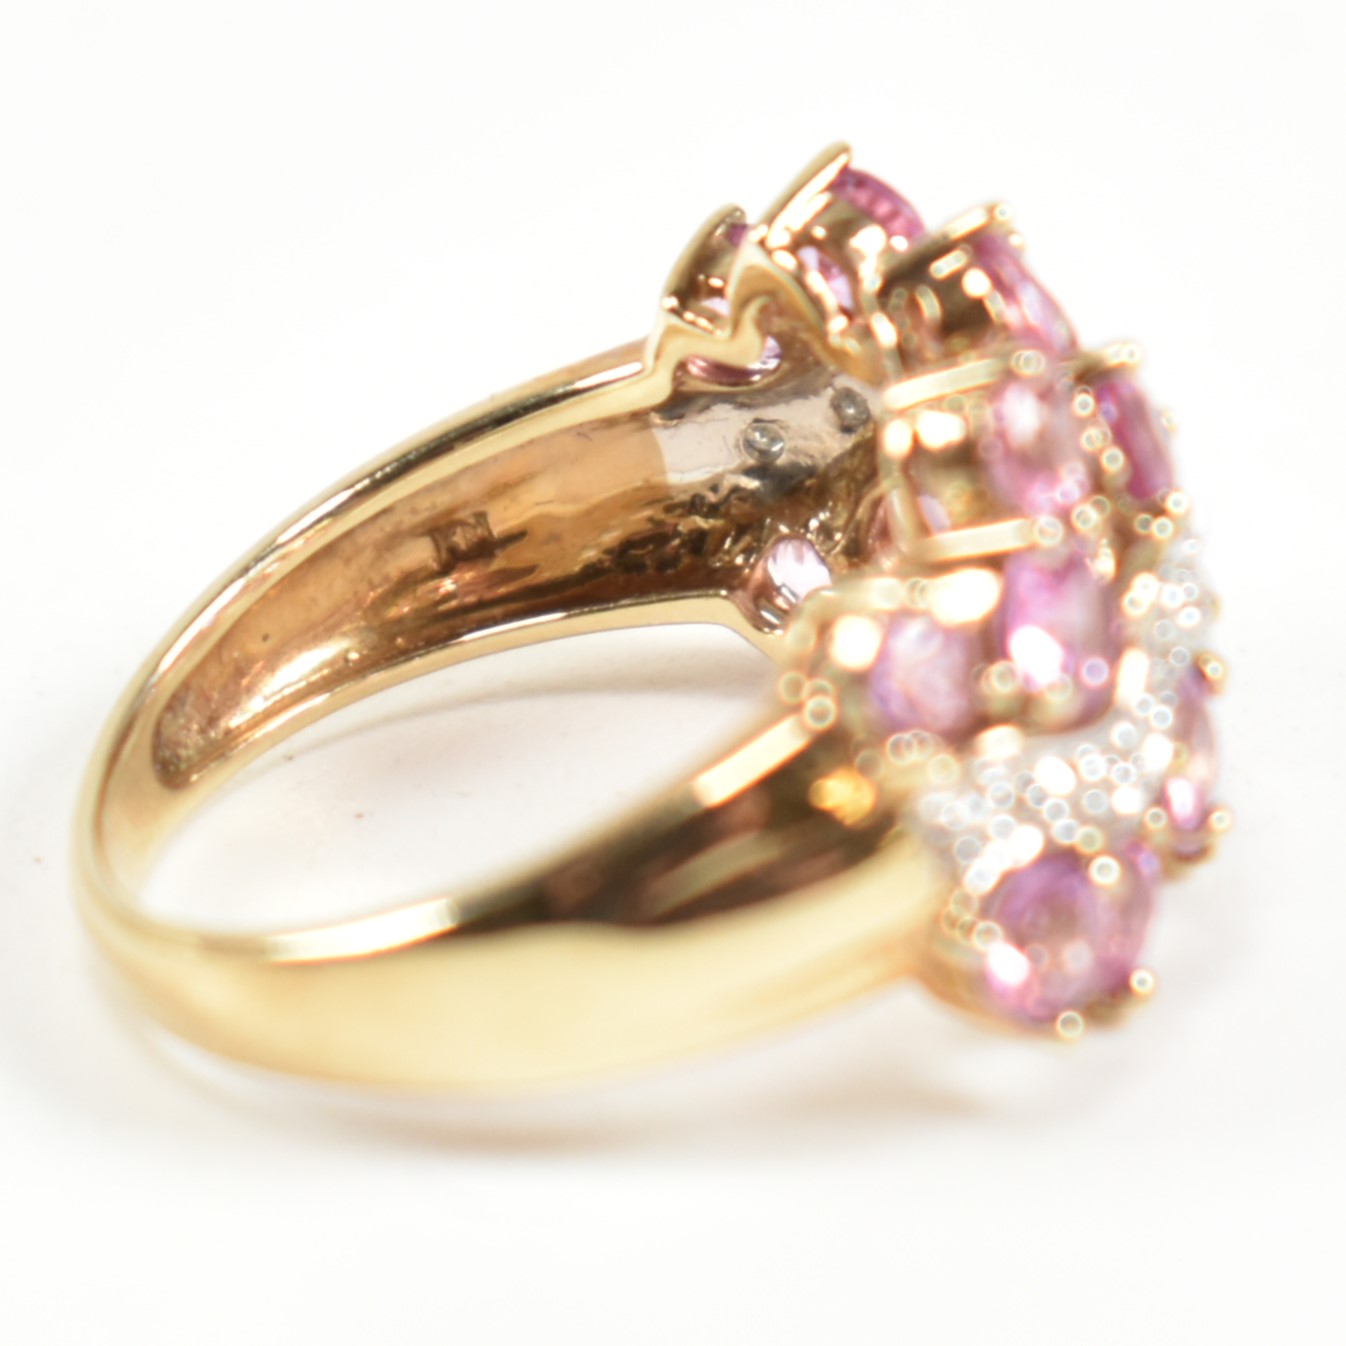 HALLMARKED 9CT GOLD PINK SAPPHIRE & DIAMOND CLUSTER RING - Image 5 of 9